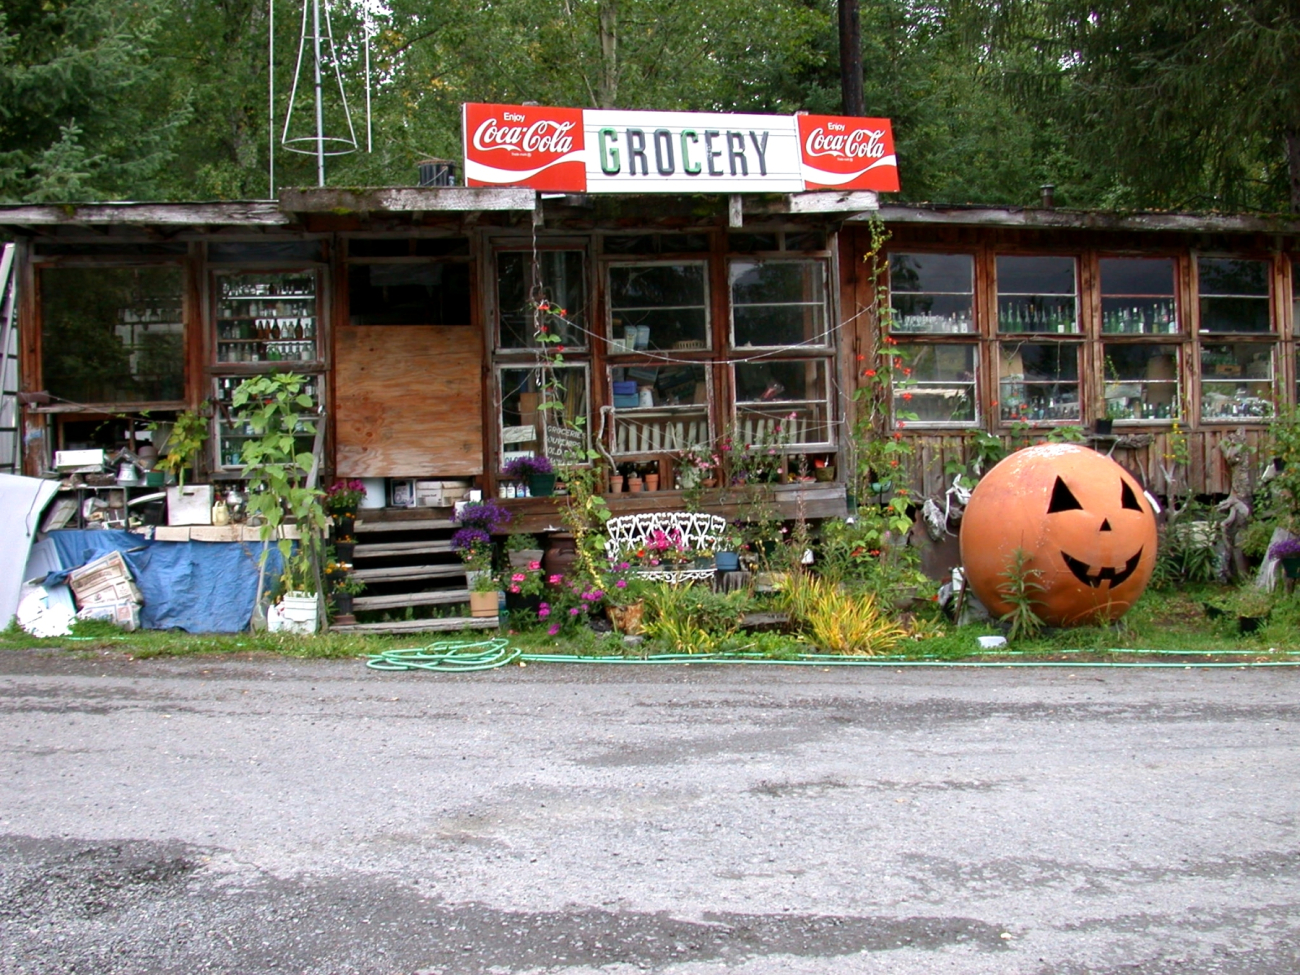 Local grocery store in Seward area